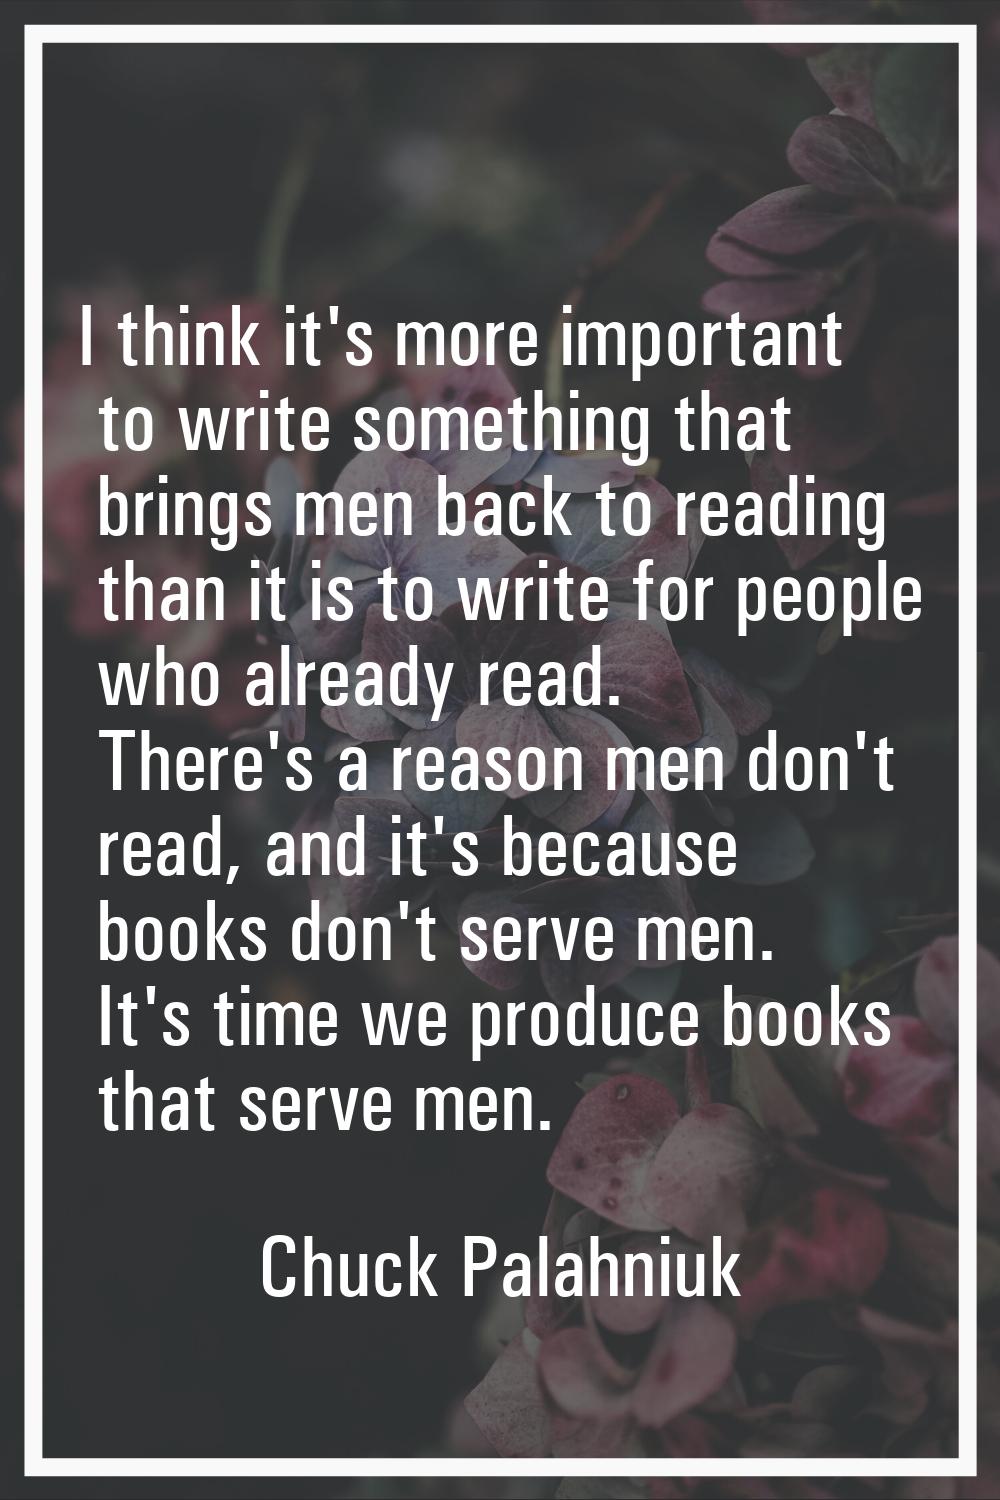 I think it's more important to write something that brings men back to reading than it is to write 